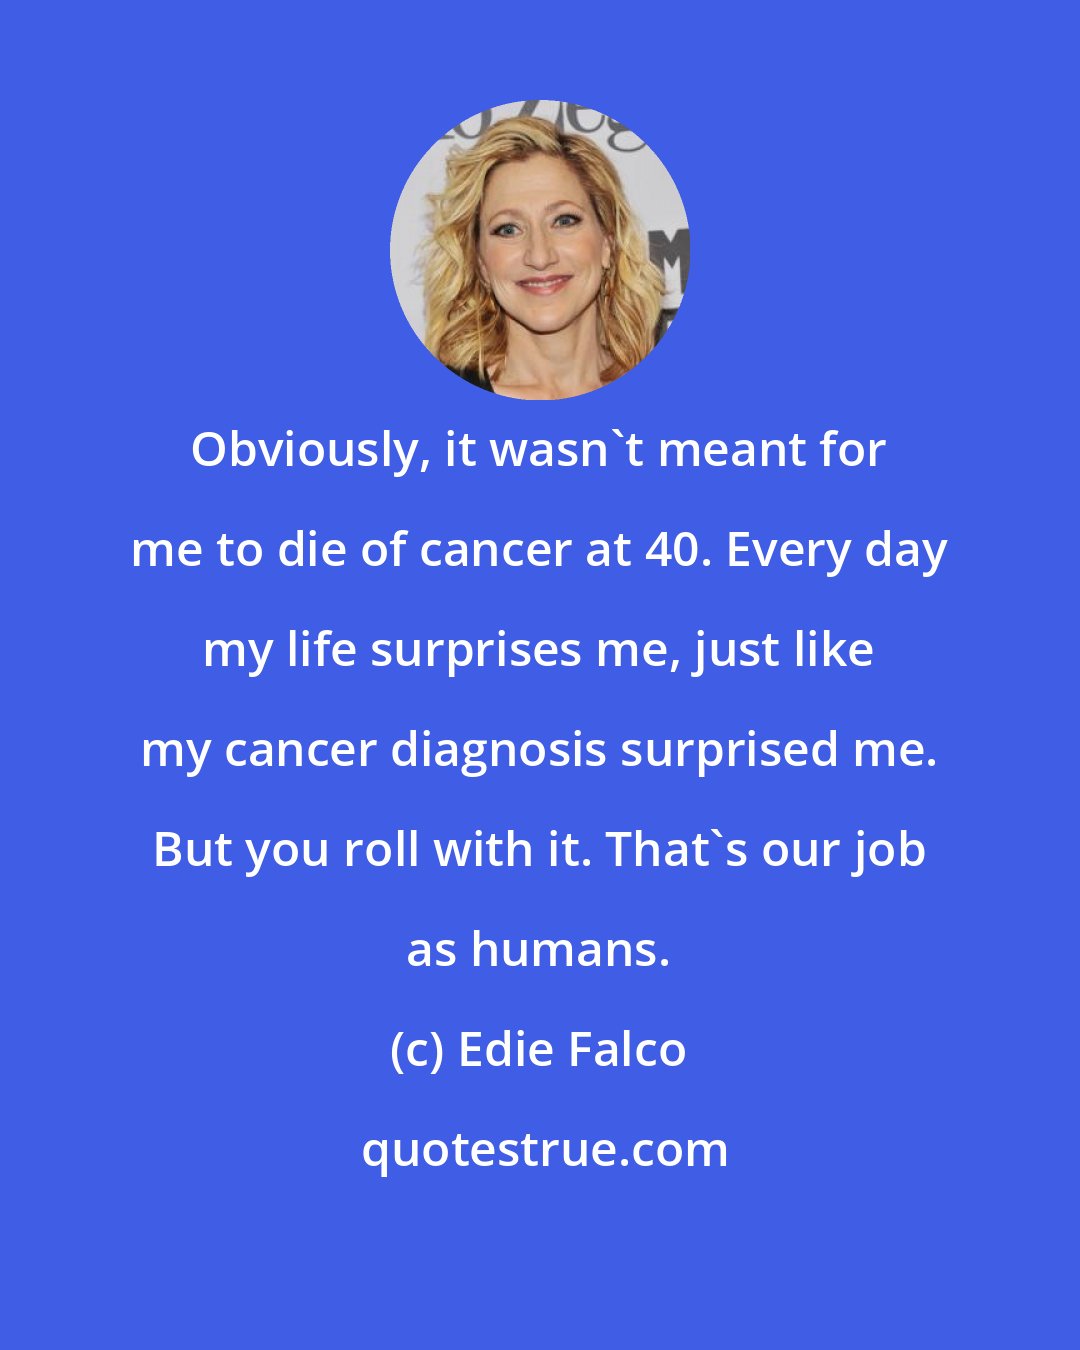 Edie Falco: Obviously, it wasn't meant for me to die of cancer at 40. Every day my life surprises me, just like my cancer diagnosis surprised me. But you roll with it. That's our job as humans.